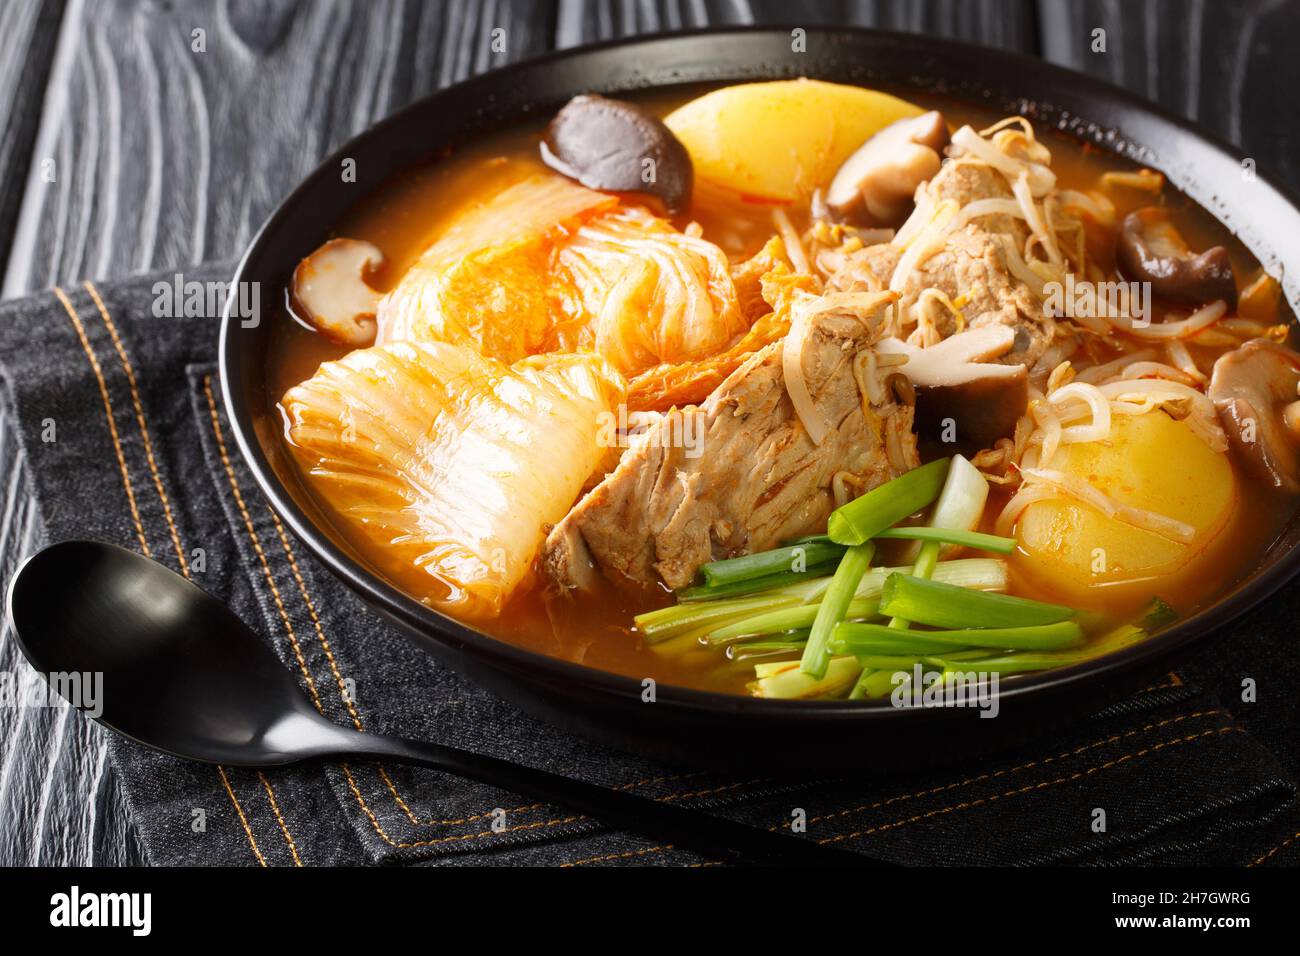 Korean Gamjatang is a spicy hearty stew made with pork bones close up in the bowl on the table. Horizontal Stock Photo